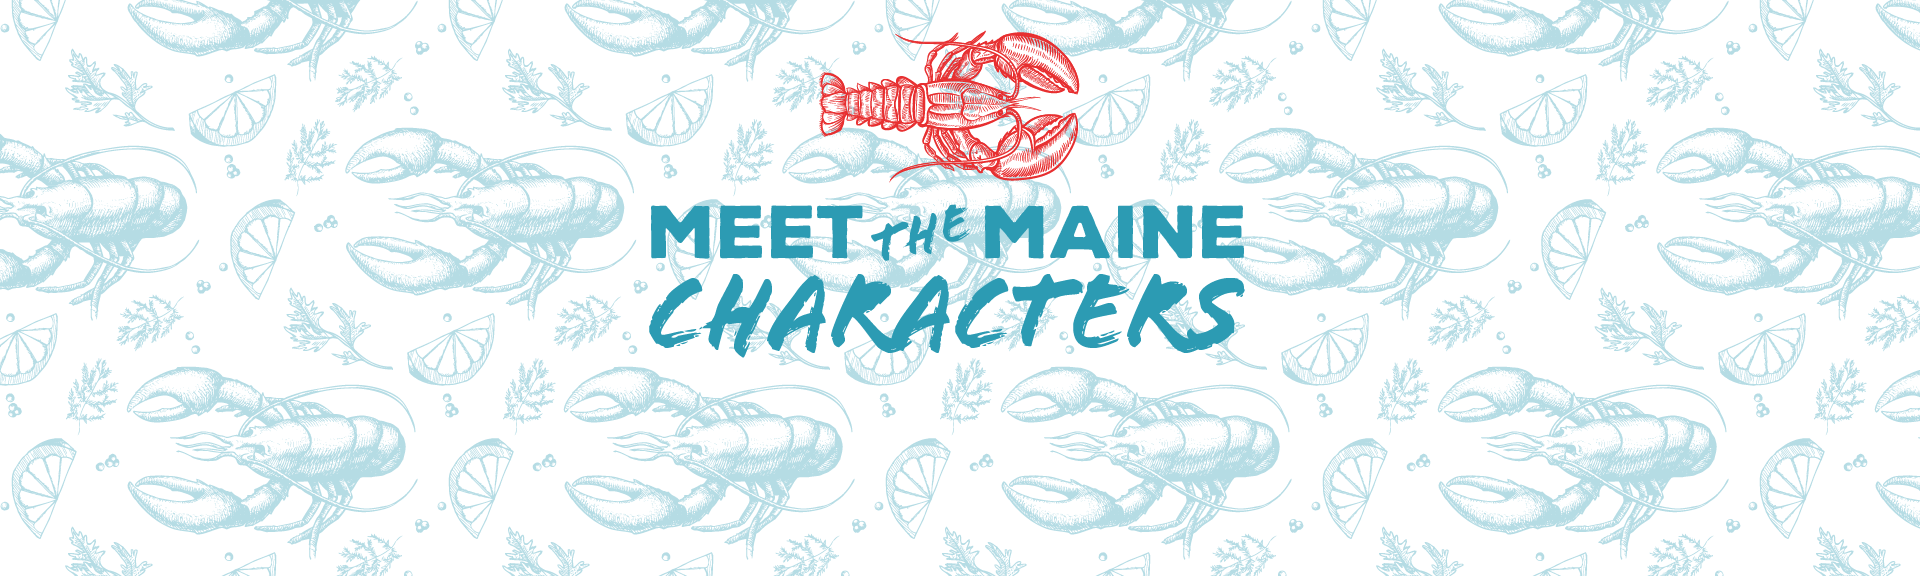 MEET THE MAINE CHARACTERS recipe image